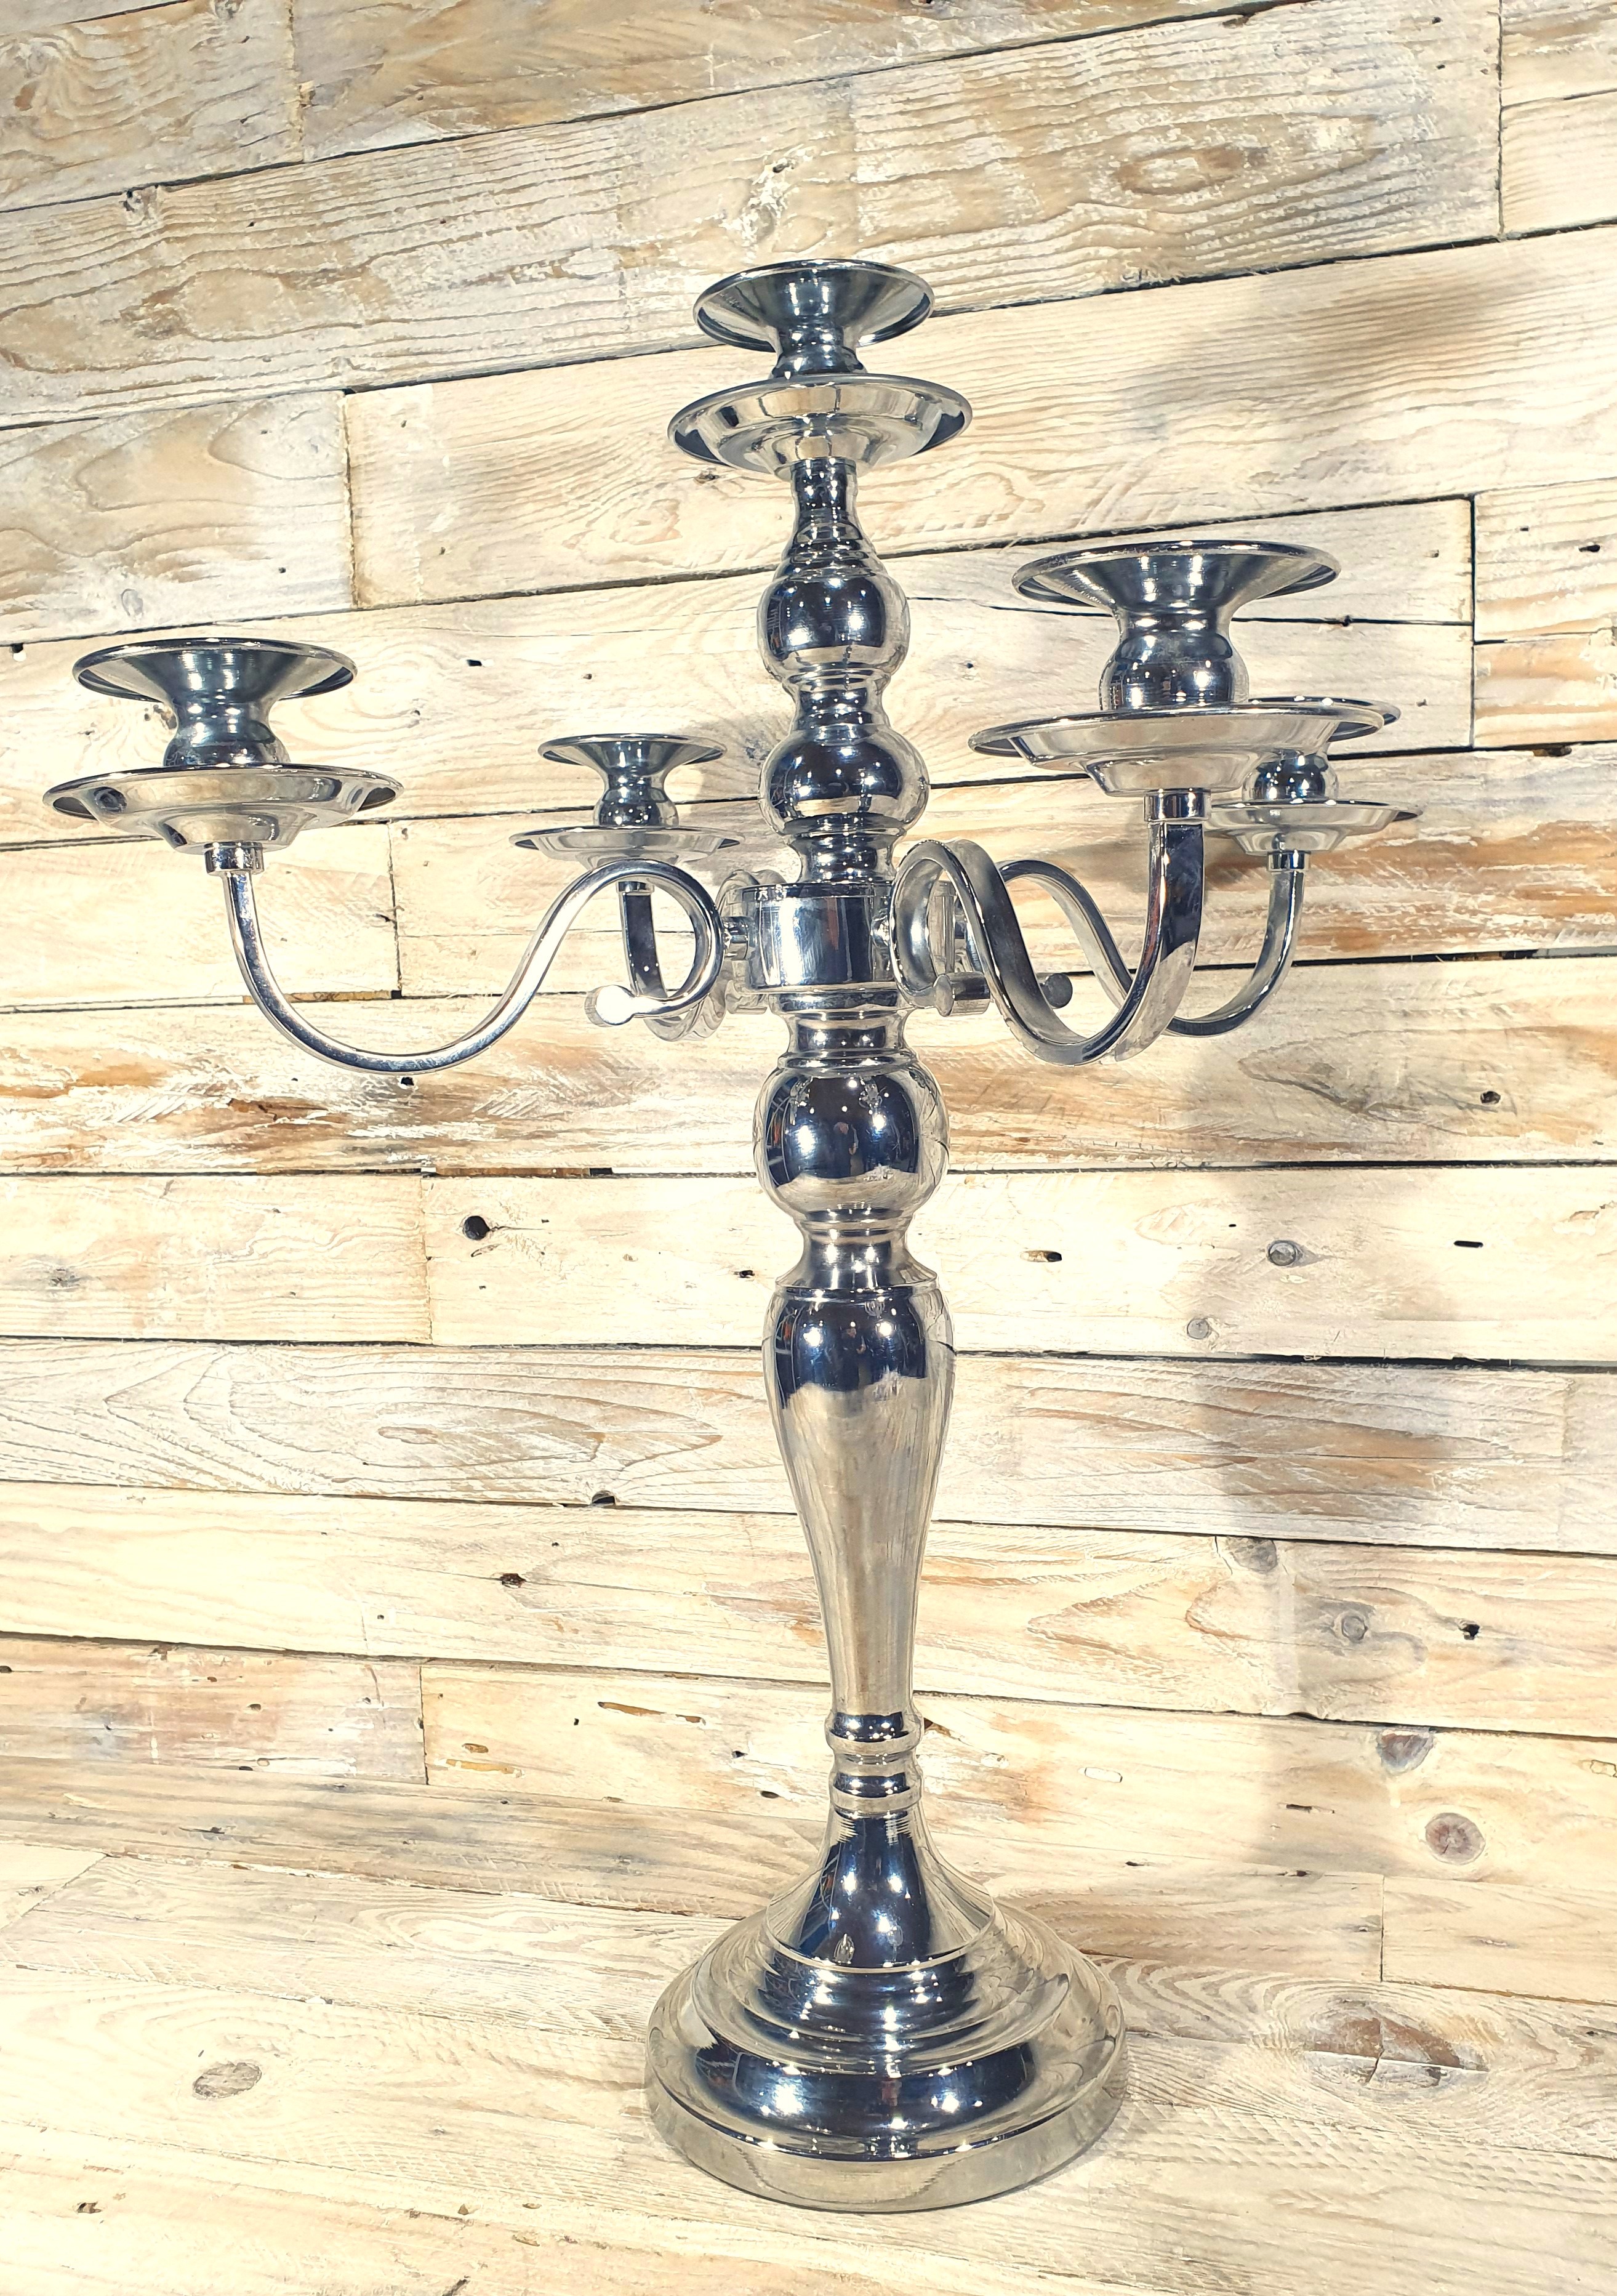 Tall Stainless Steel 5 Pot Table Candelabra Candle Holder 48cm x 33cm x 33cm Rrp £99 - Image 3 of 3